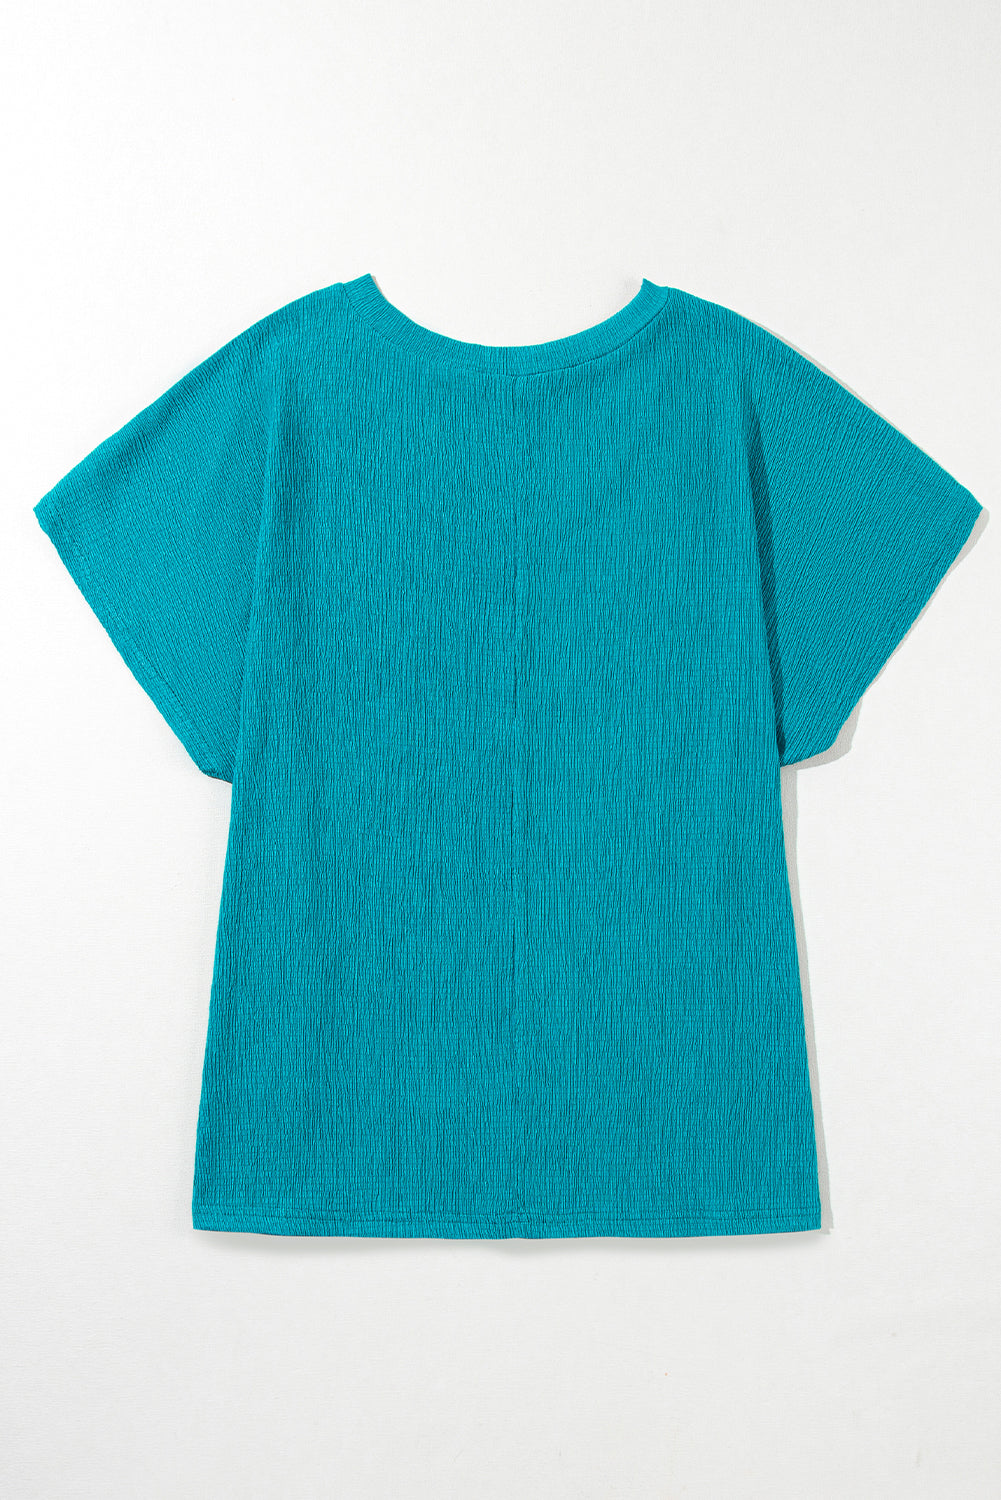 Teal Textured V-neck Plus Size Top